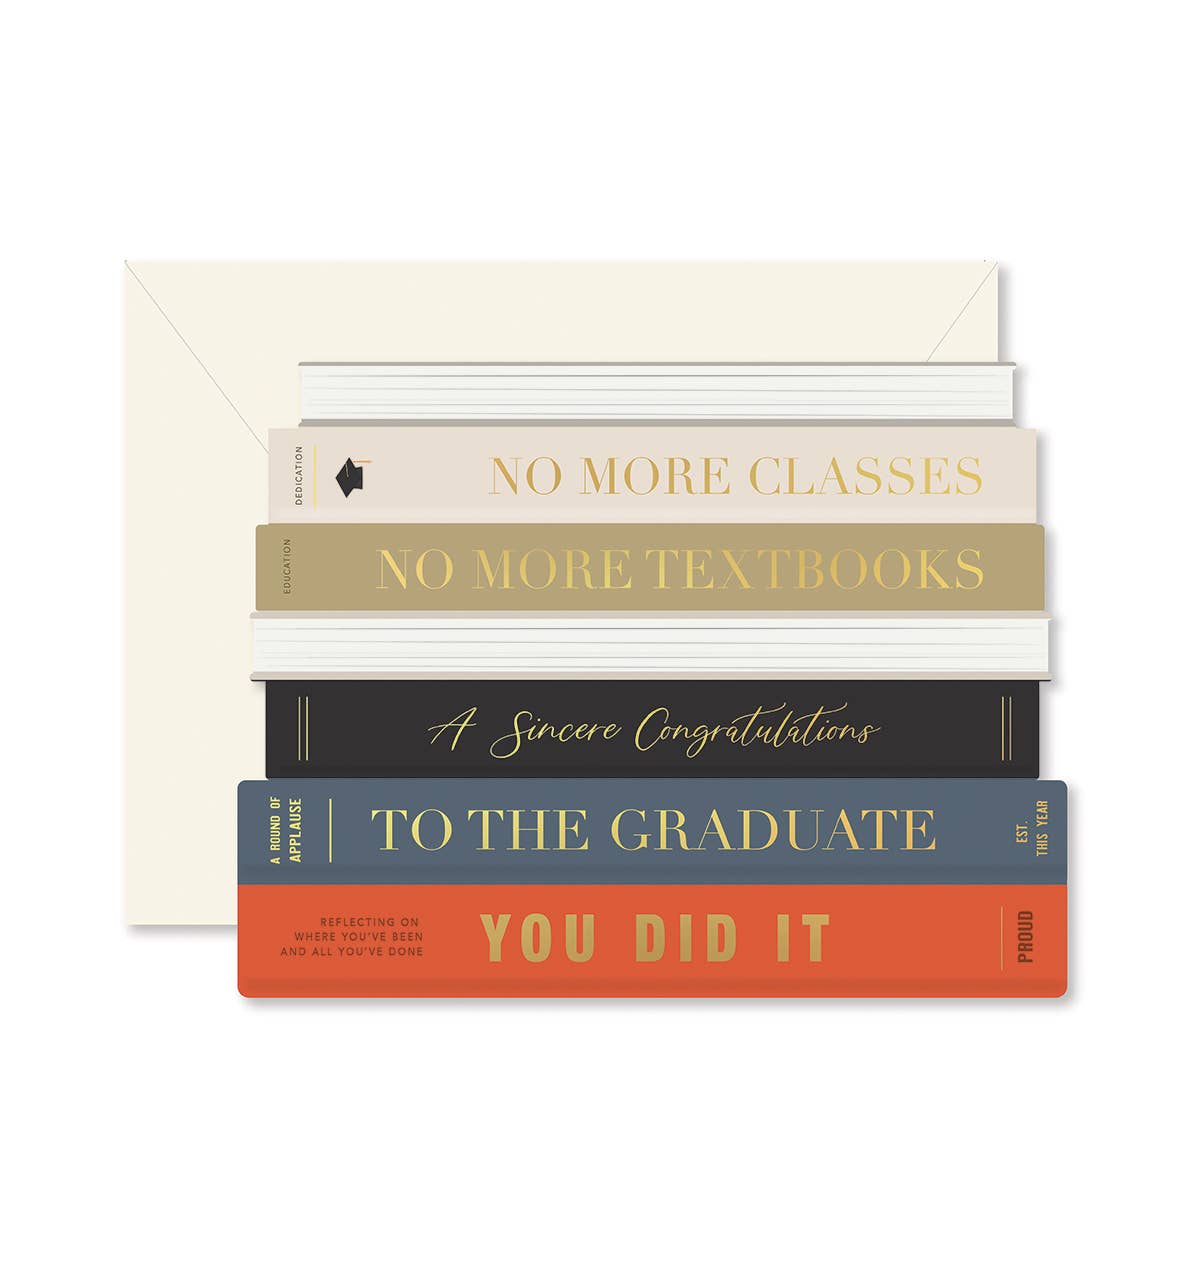 A stack of books no more classes no more books a sincere congratulations to the graduate you did it! Graduation Books Greeting Card with coordinating envelope by Ginger P. Designs.